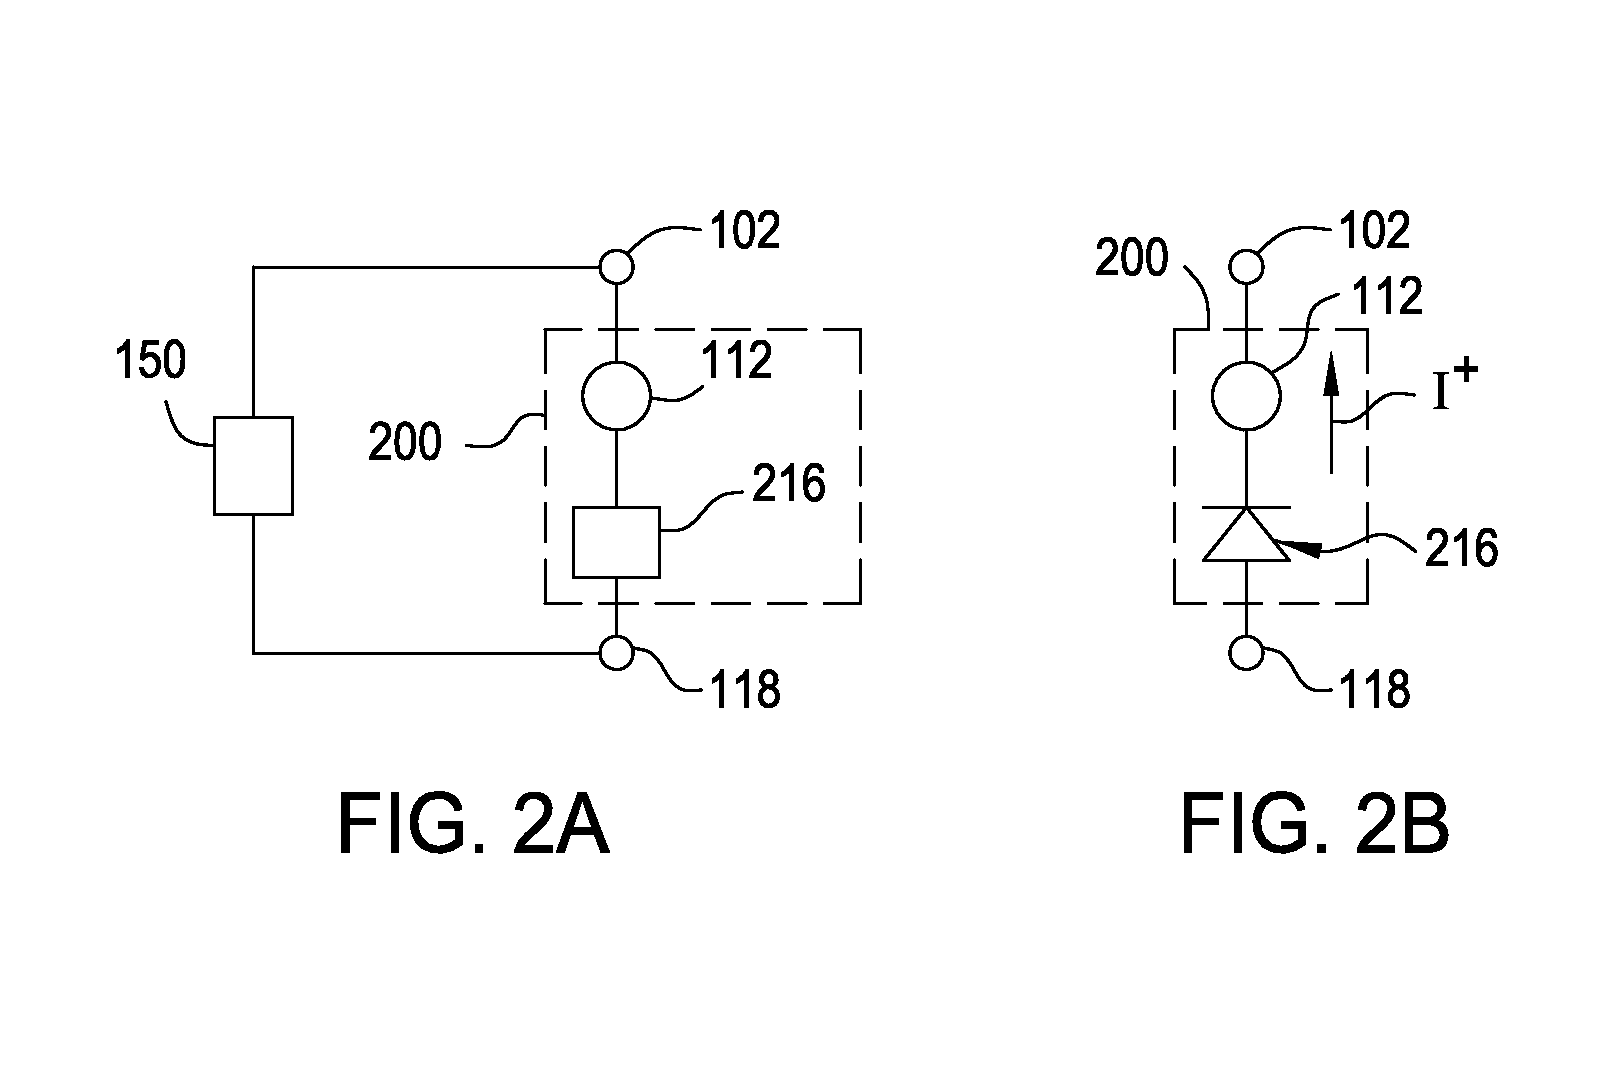 Nonvolatile memory device using a varistor as a current limiter element